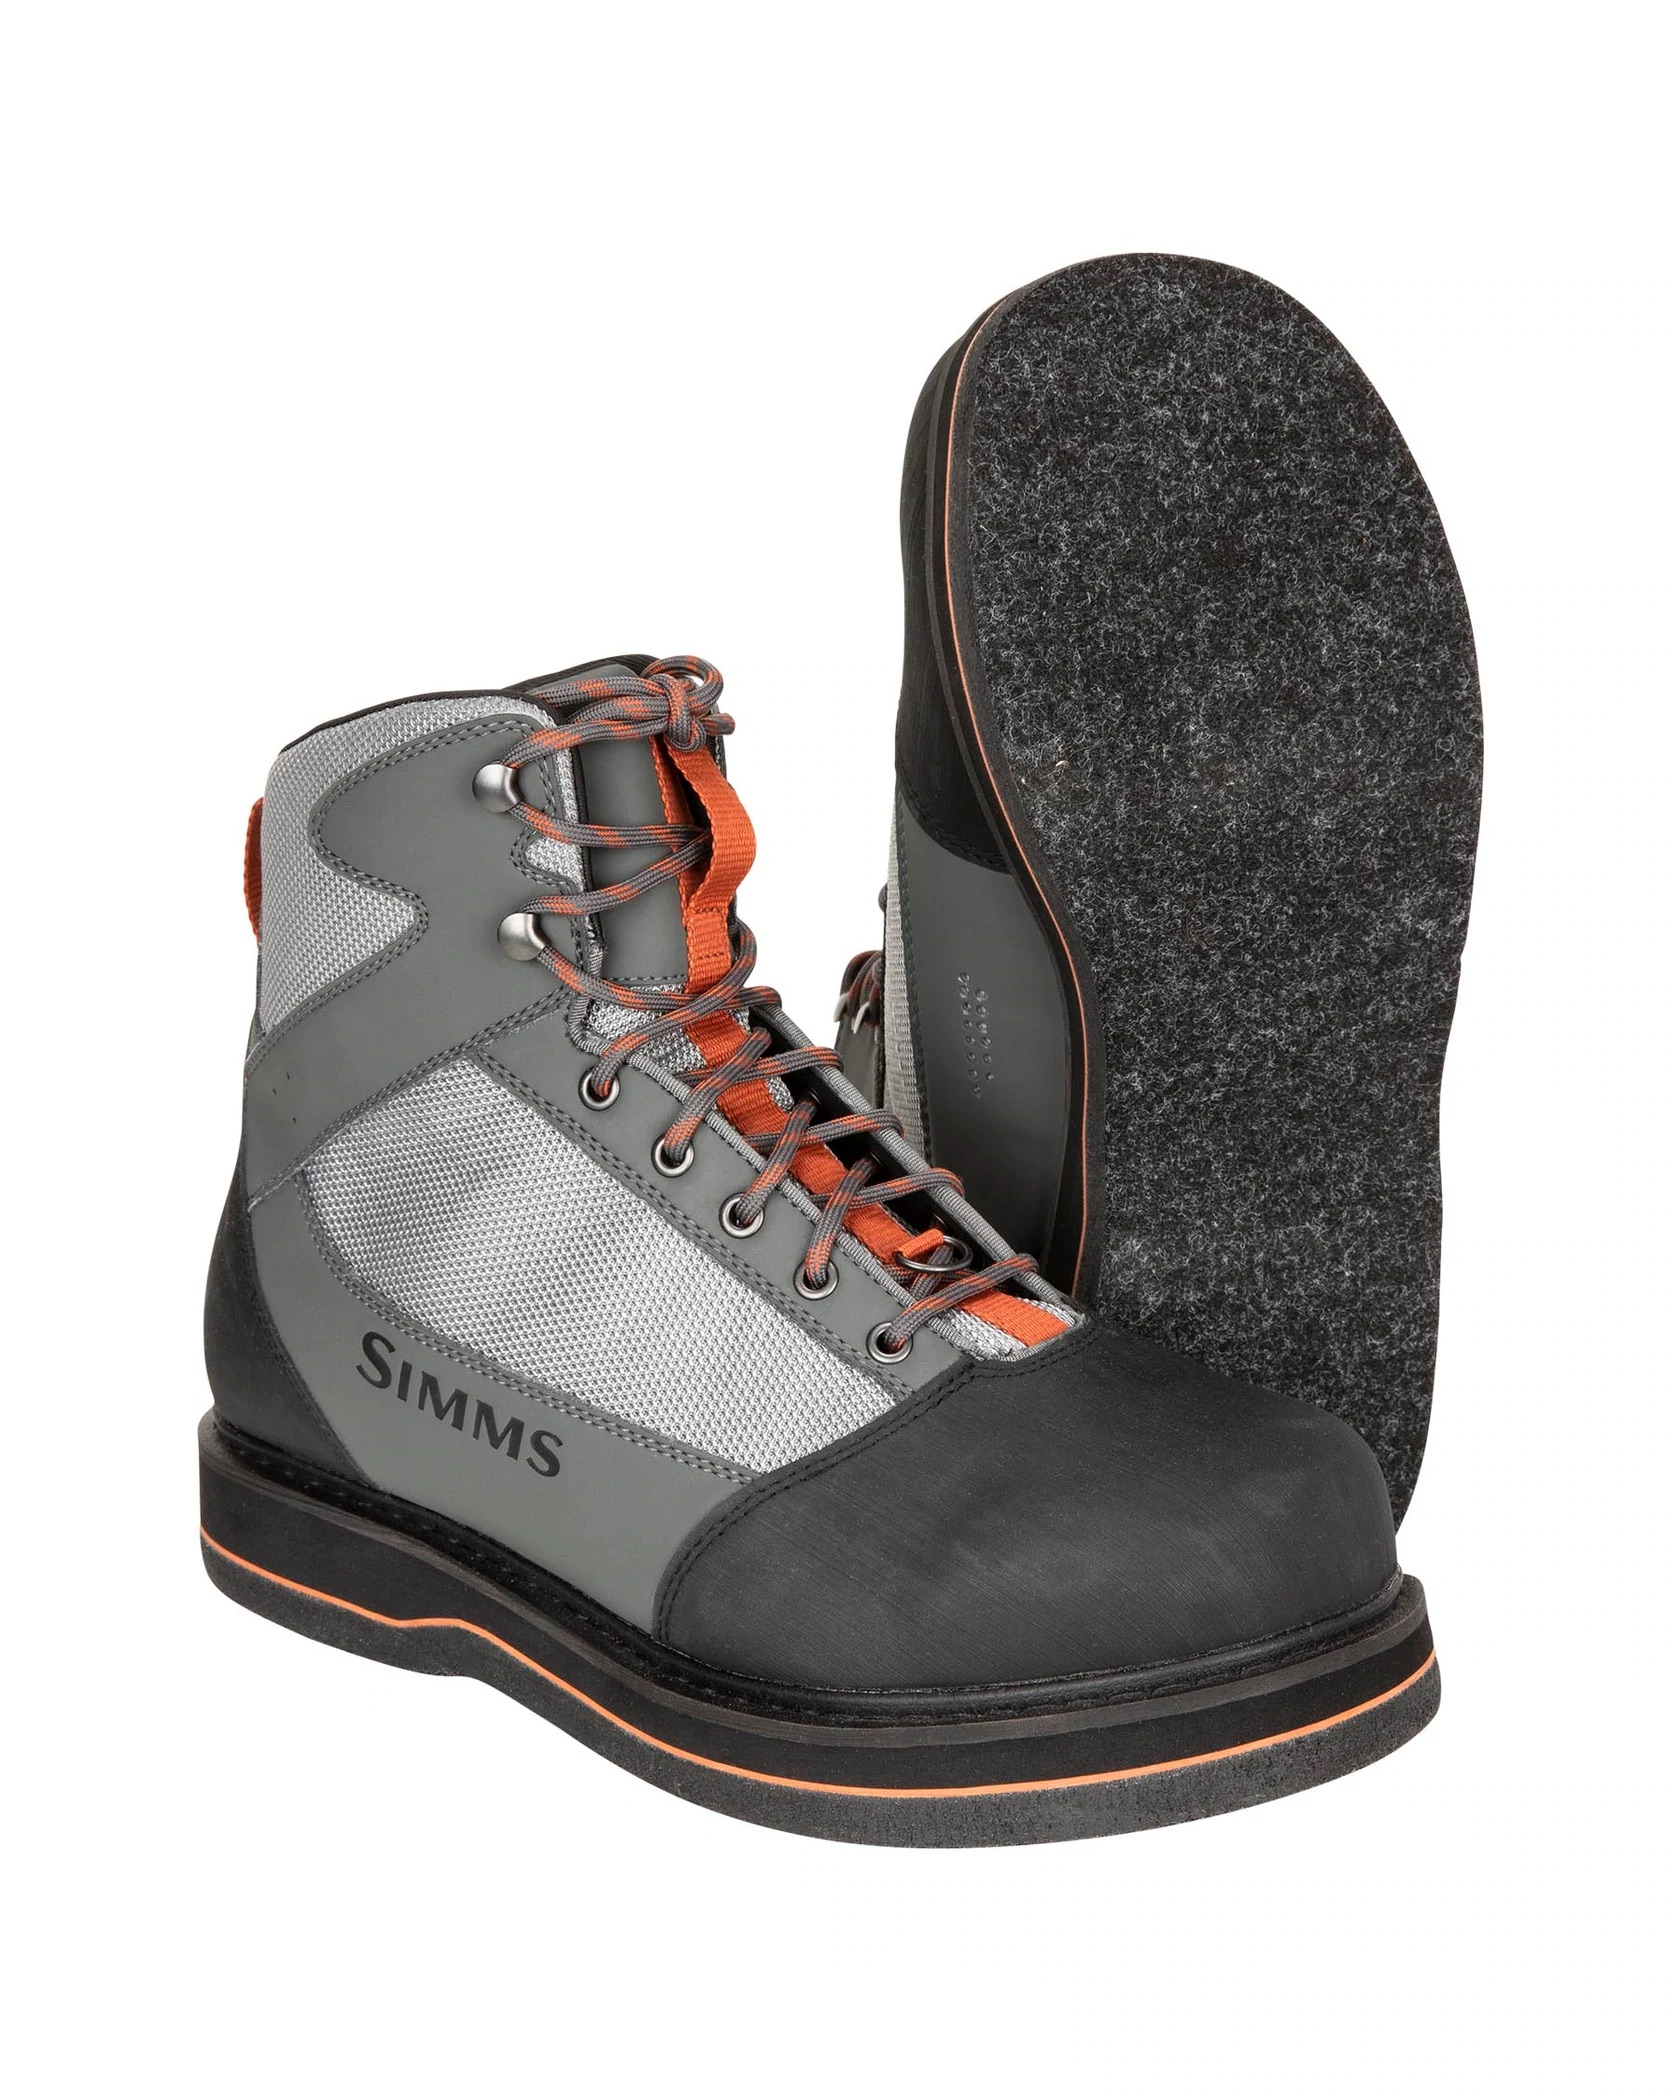 Simms Tributary Boot - Felt - Size 14